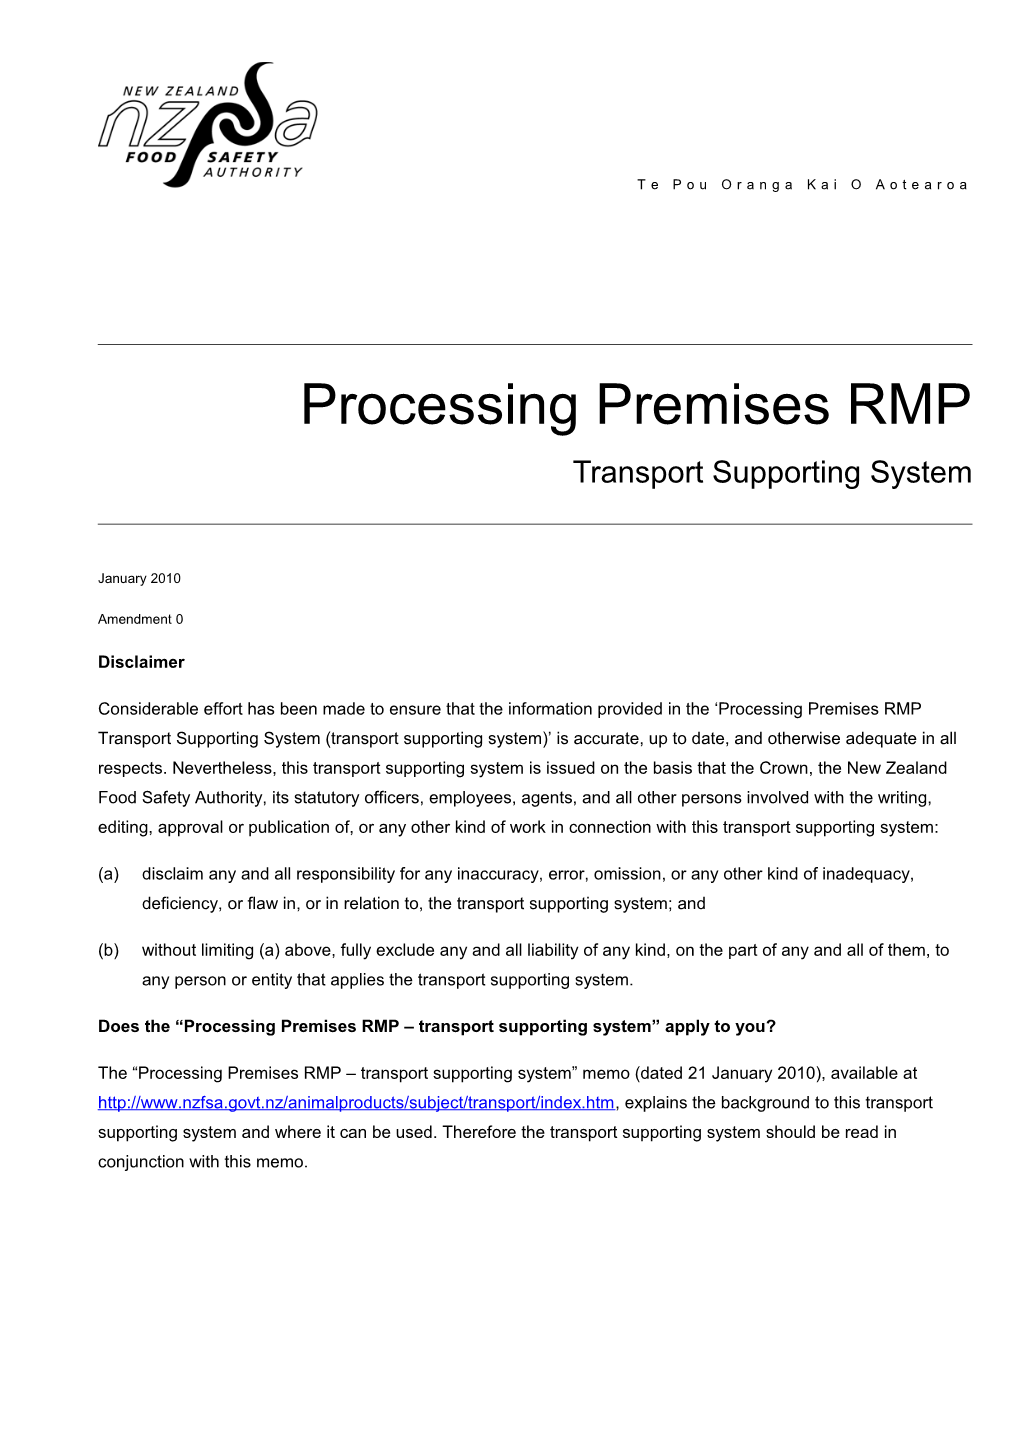 Processing Premises RMP Transport Supporting System